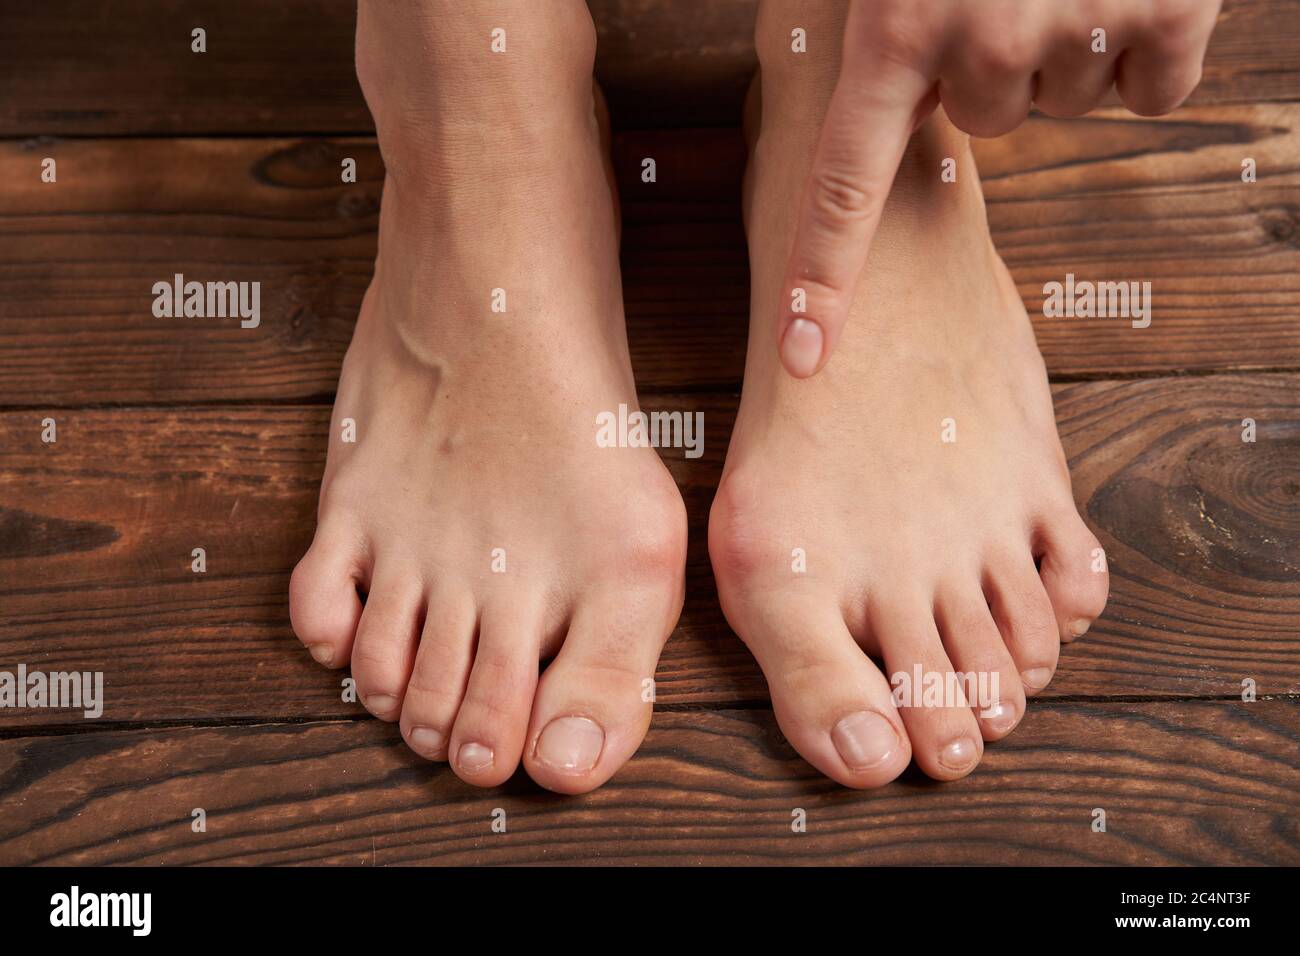 Hllux Valgus on female legs close up on wooden background. Foot joint deformity. Health care and medicine problem with human body Stock Photo